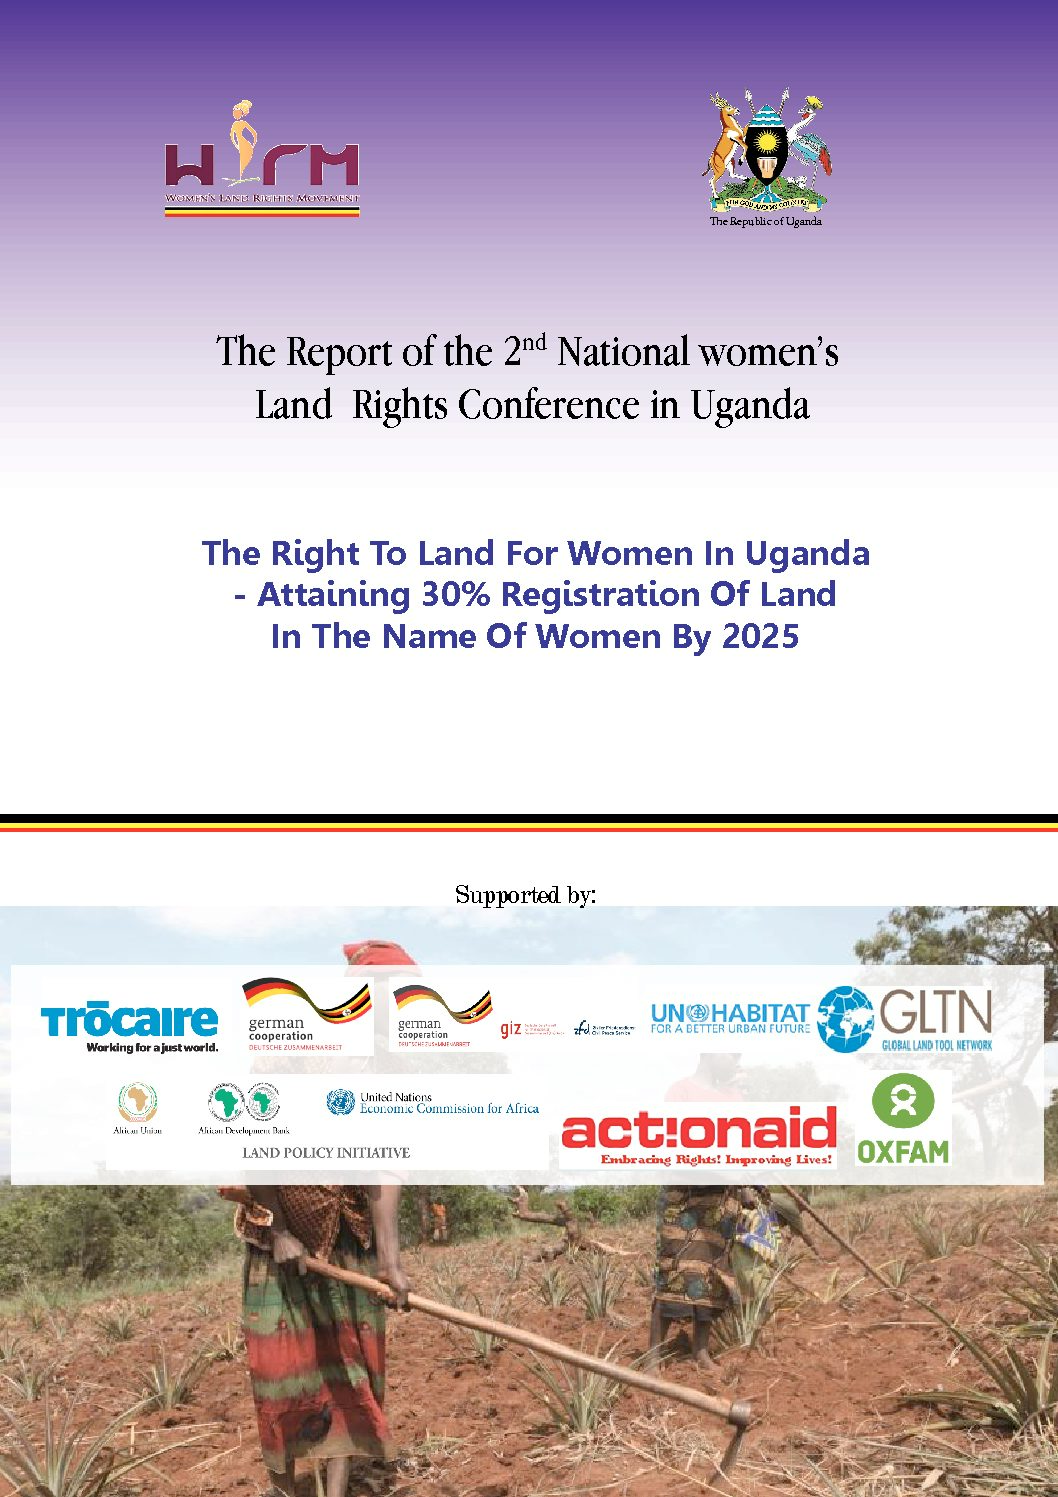 The Report of the 2nd National women’s Land Rights Conference in Uganda